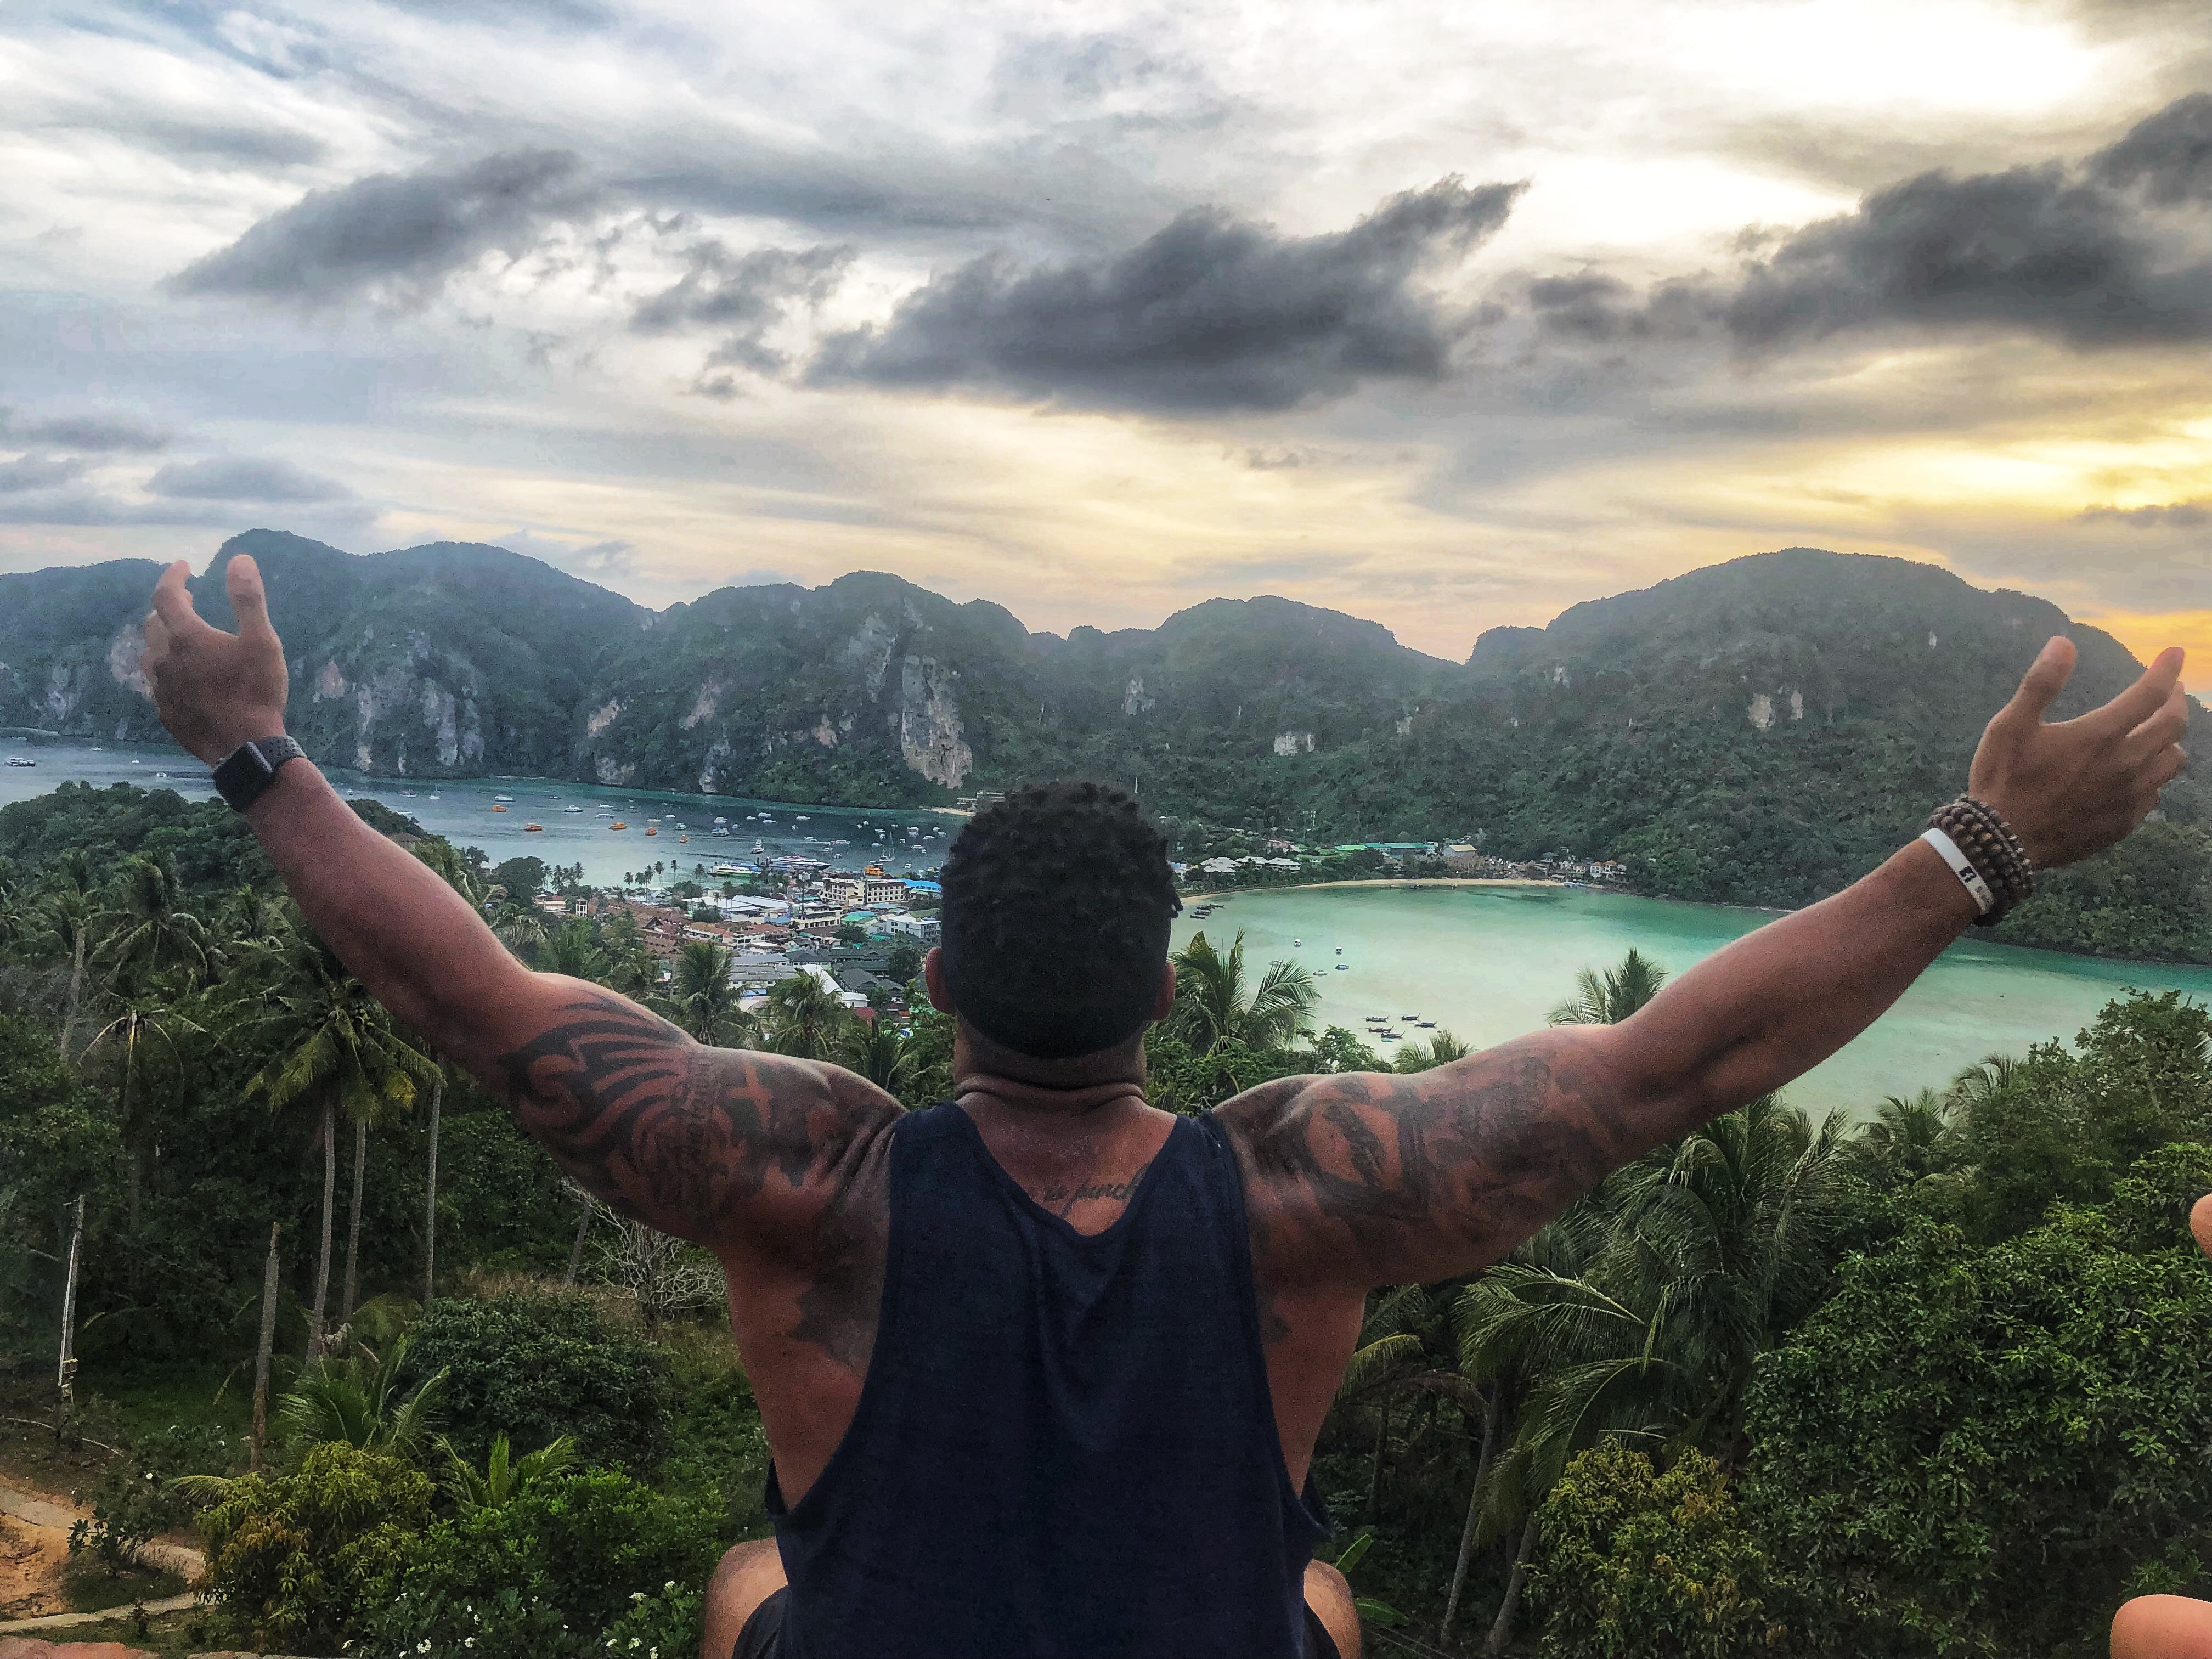 The Black Expat: 'I Moved To Vietnam With No Job Lined Up'